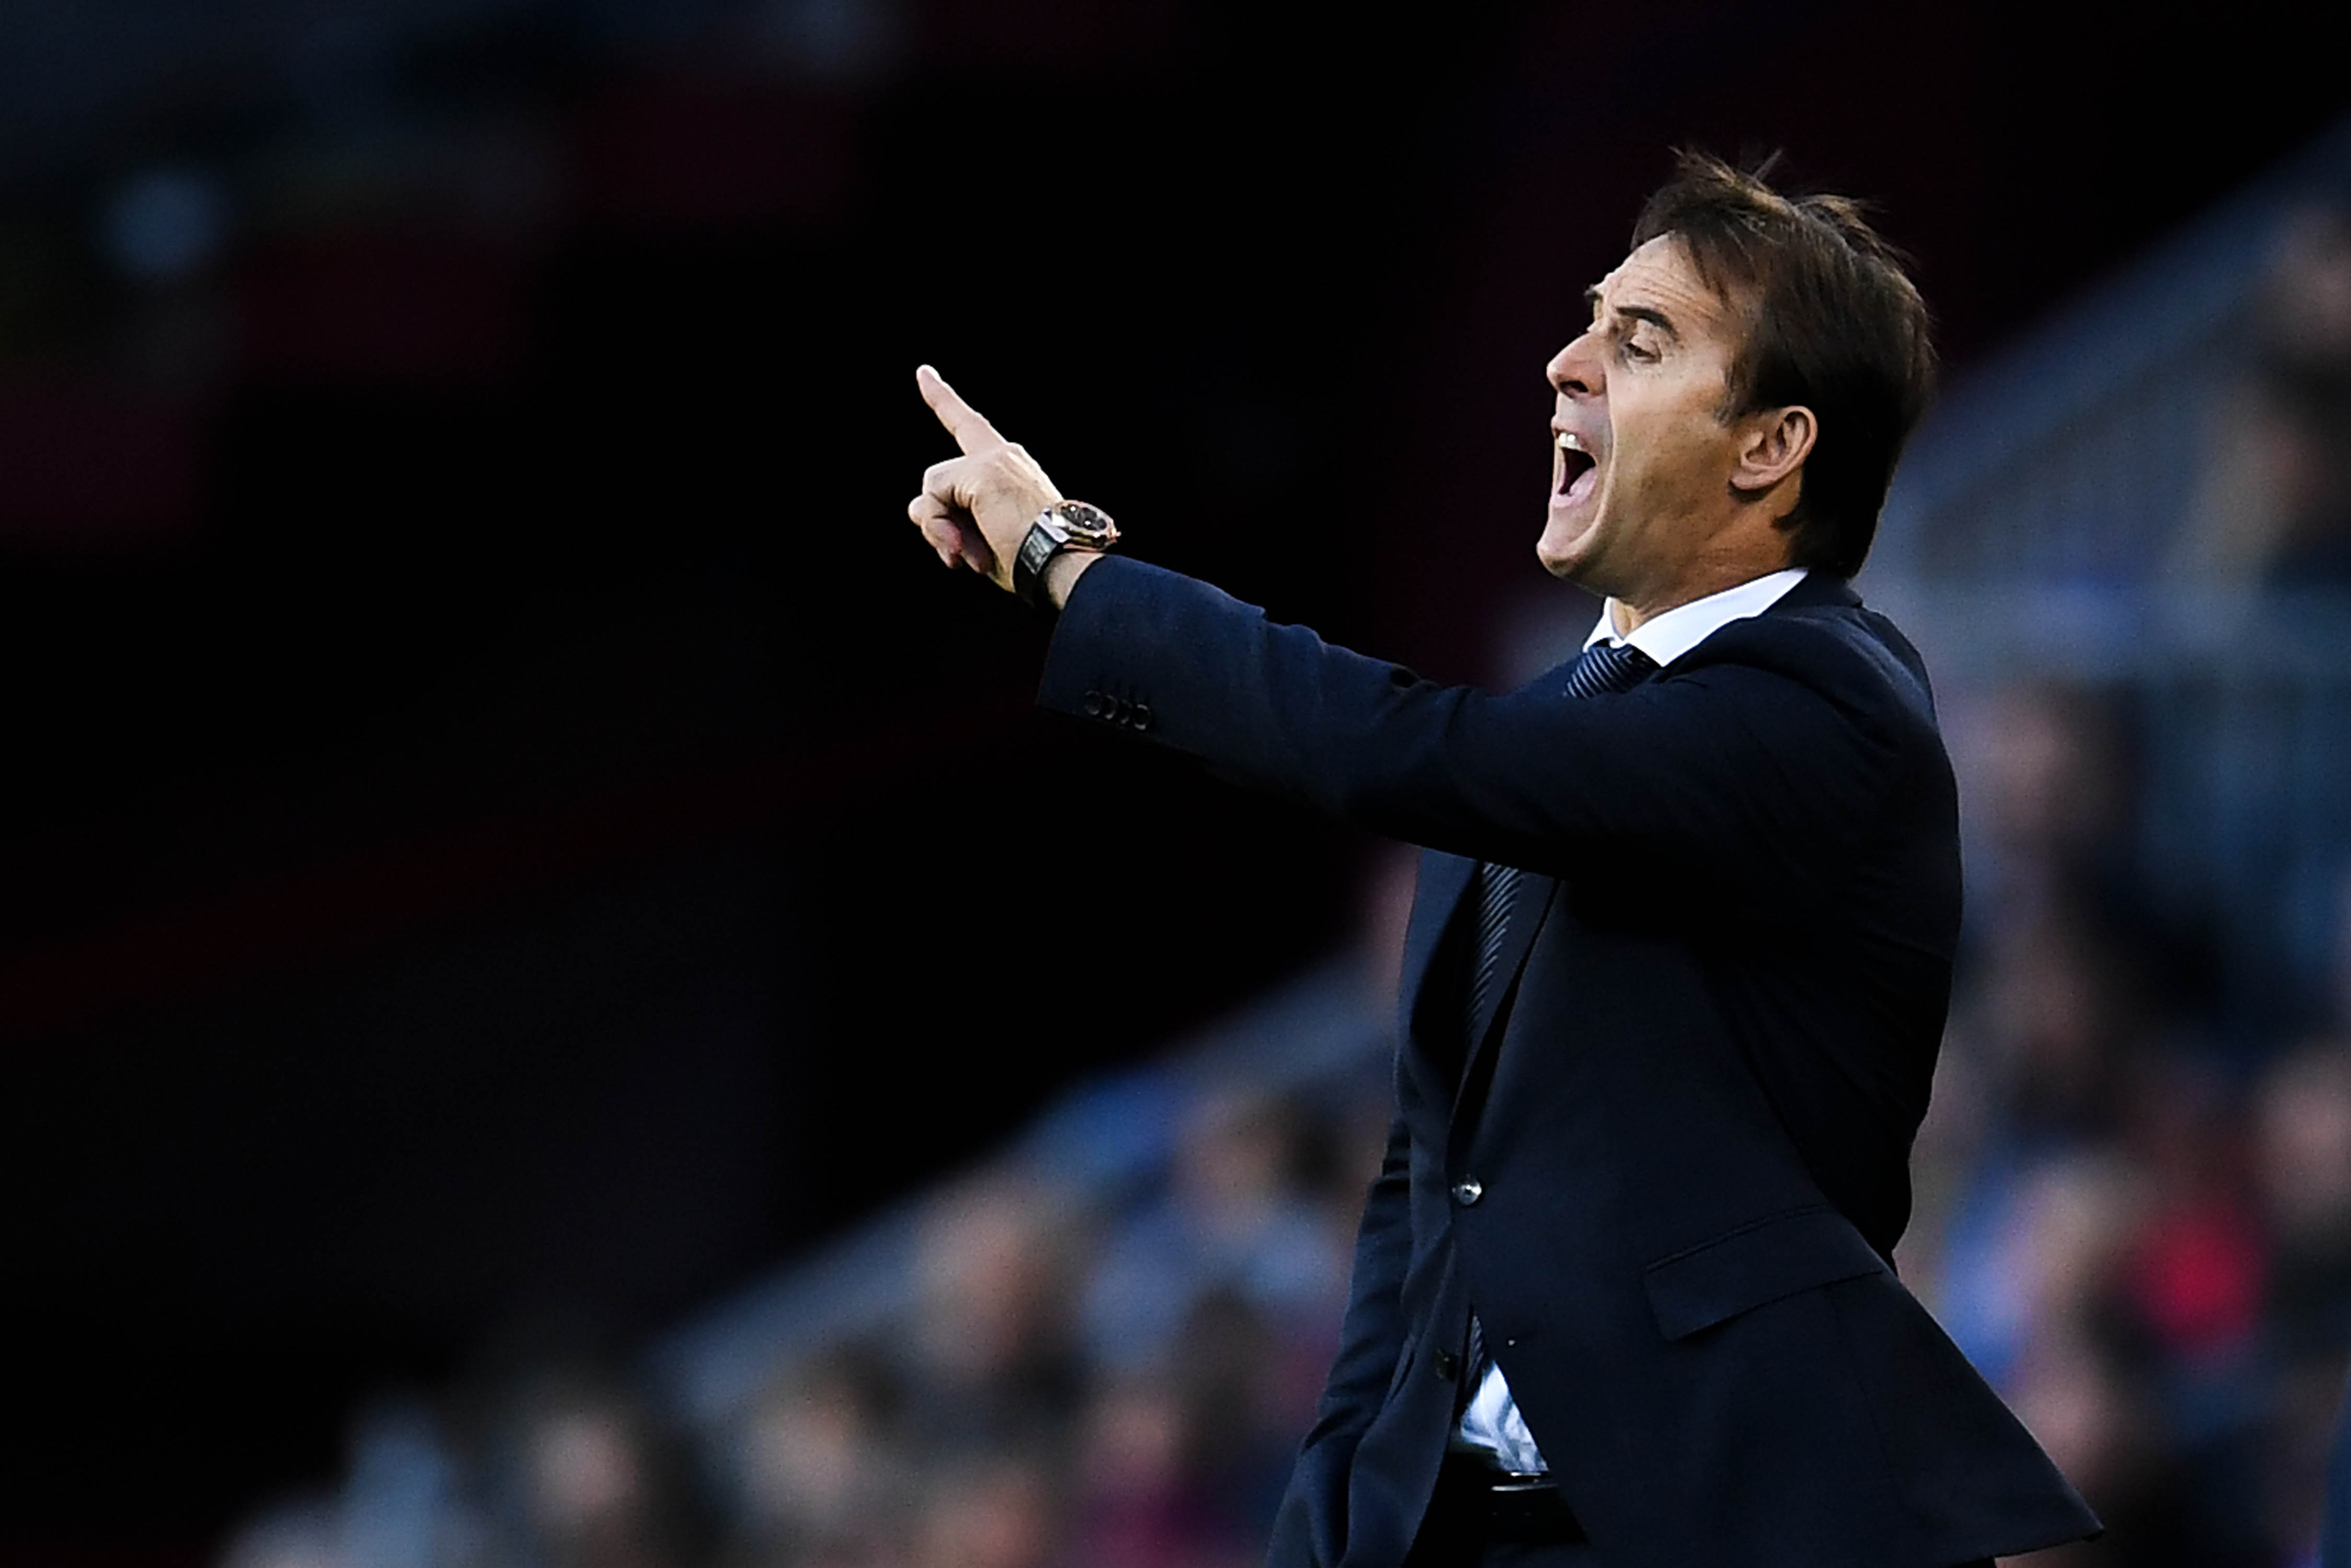 Julen Lopetegui to Manchester United? (Photo by David Ramos/Getty Images)